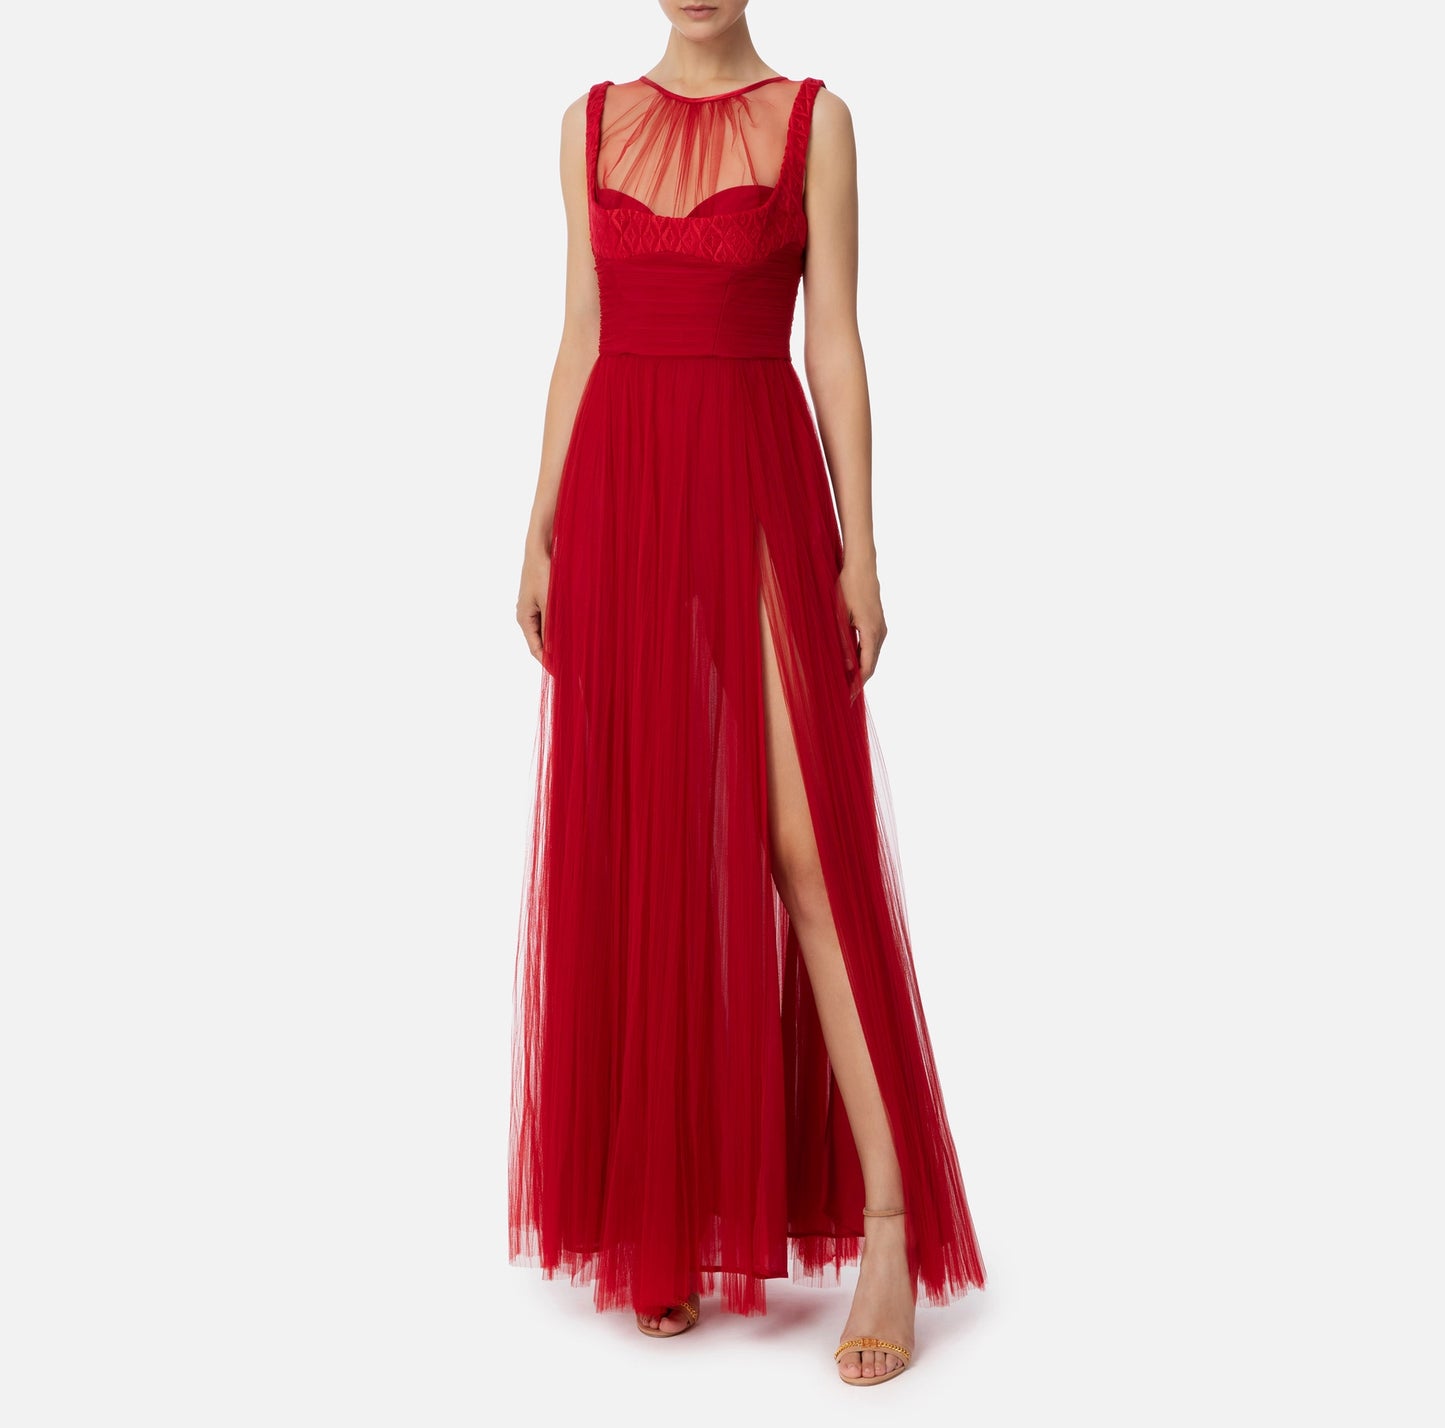 Red Carpet dress in pleated tulle fabric